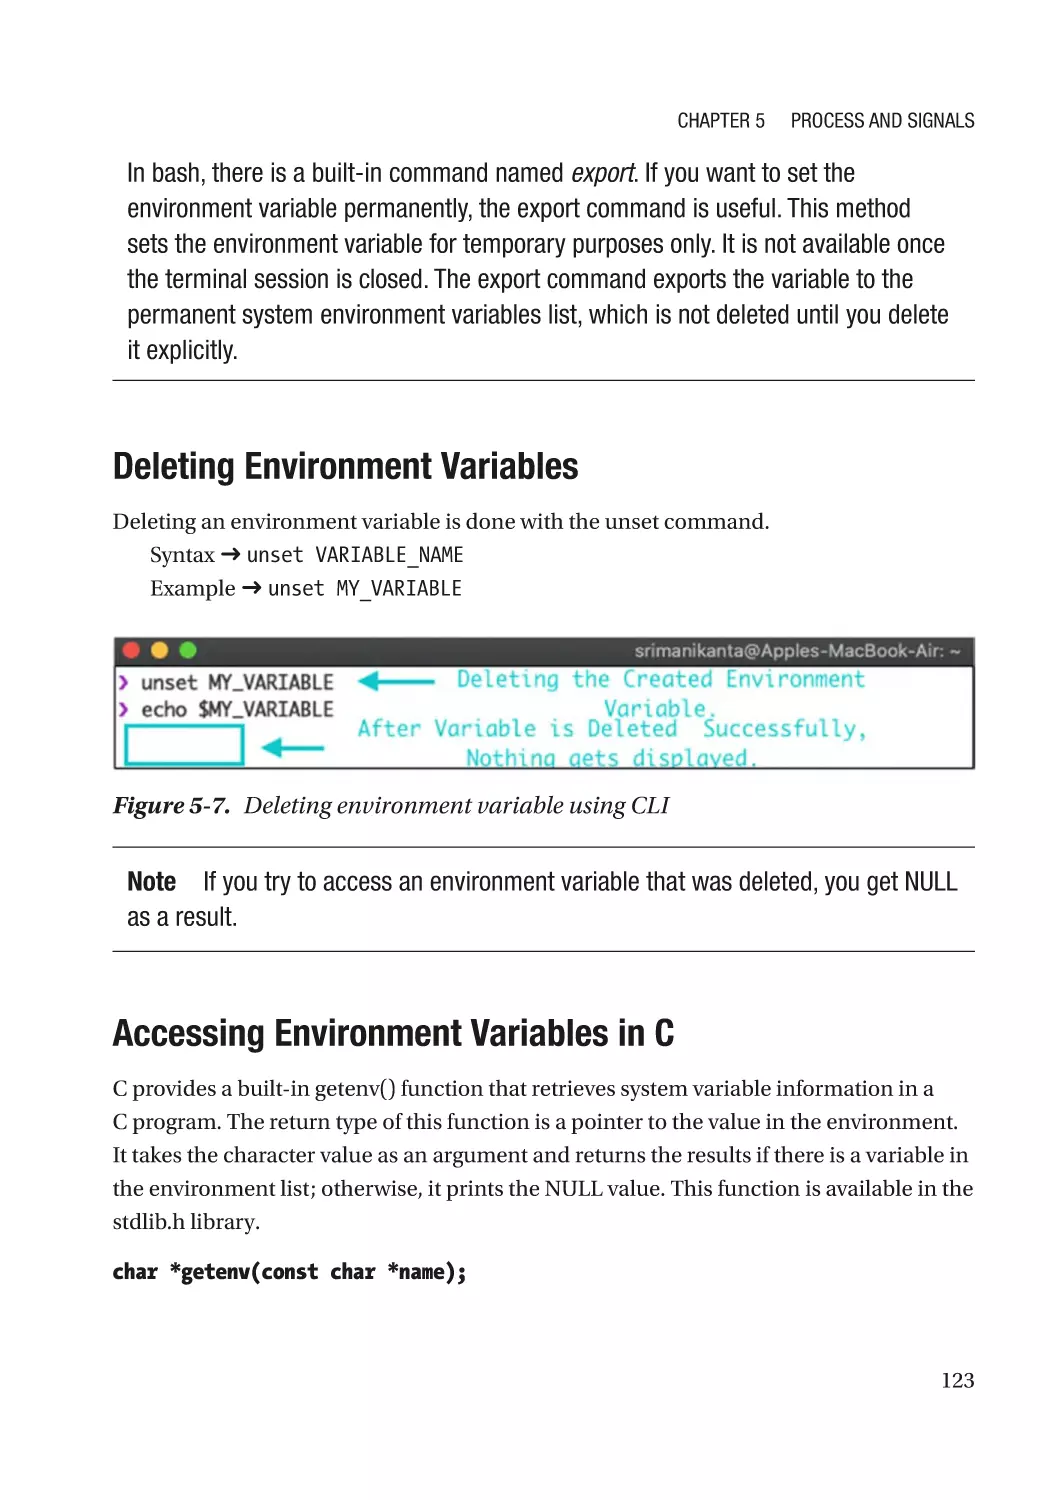 Deleting Environment Variables
Accessing Environment Variables in C